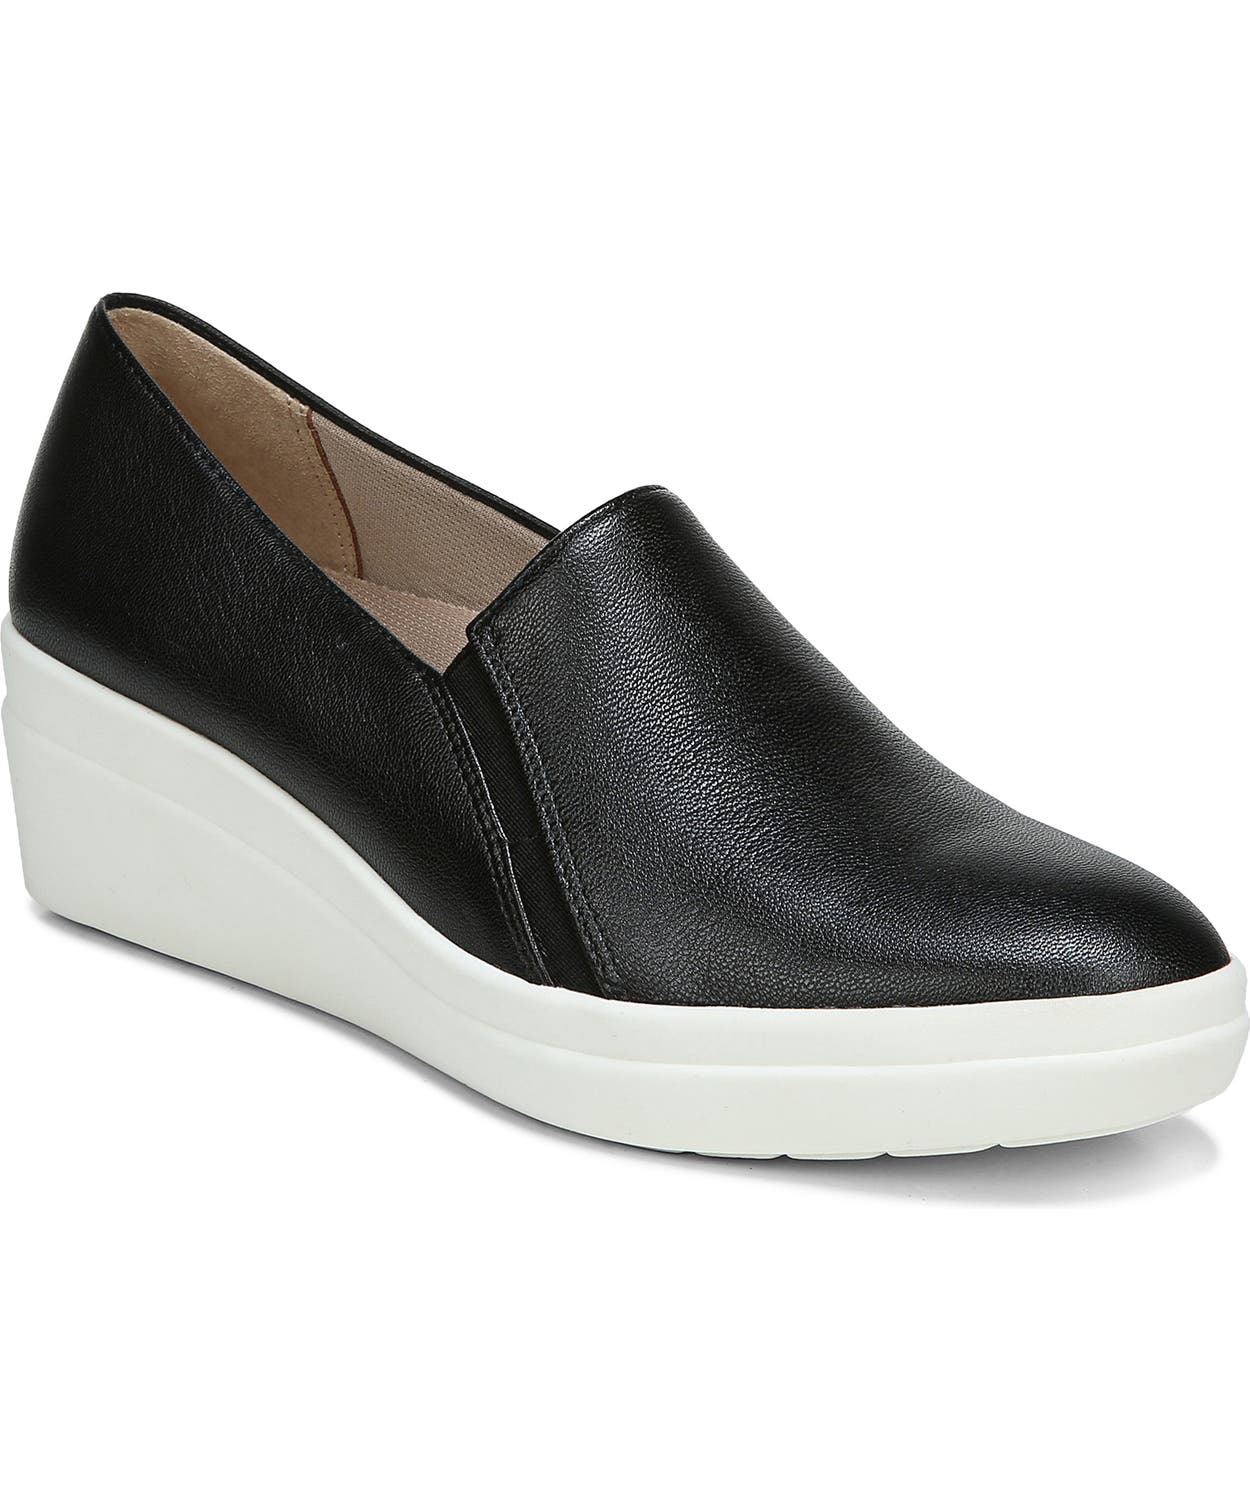 www.couturepoint.com-naturalizer-womens-black-leather-snowy-slip-on-shoes